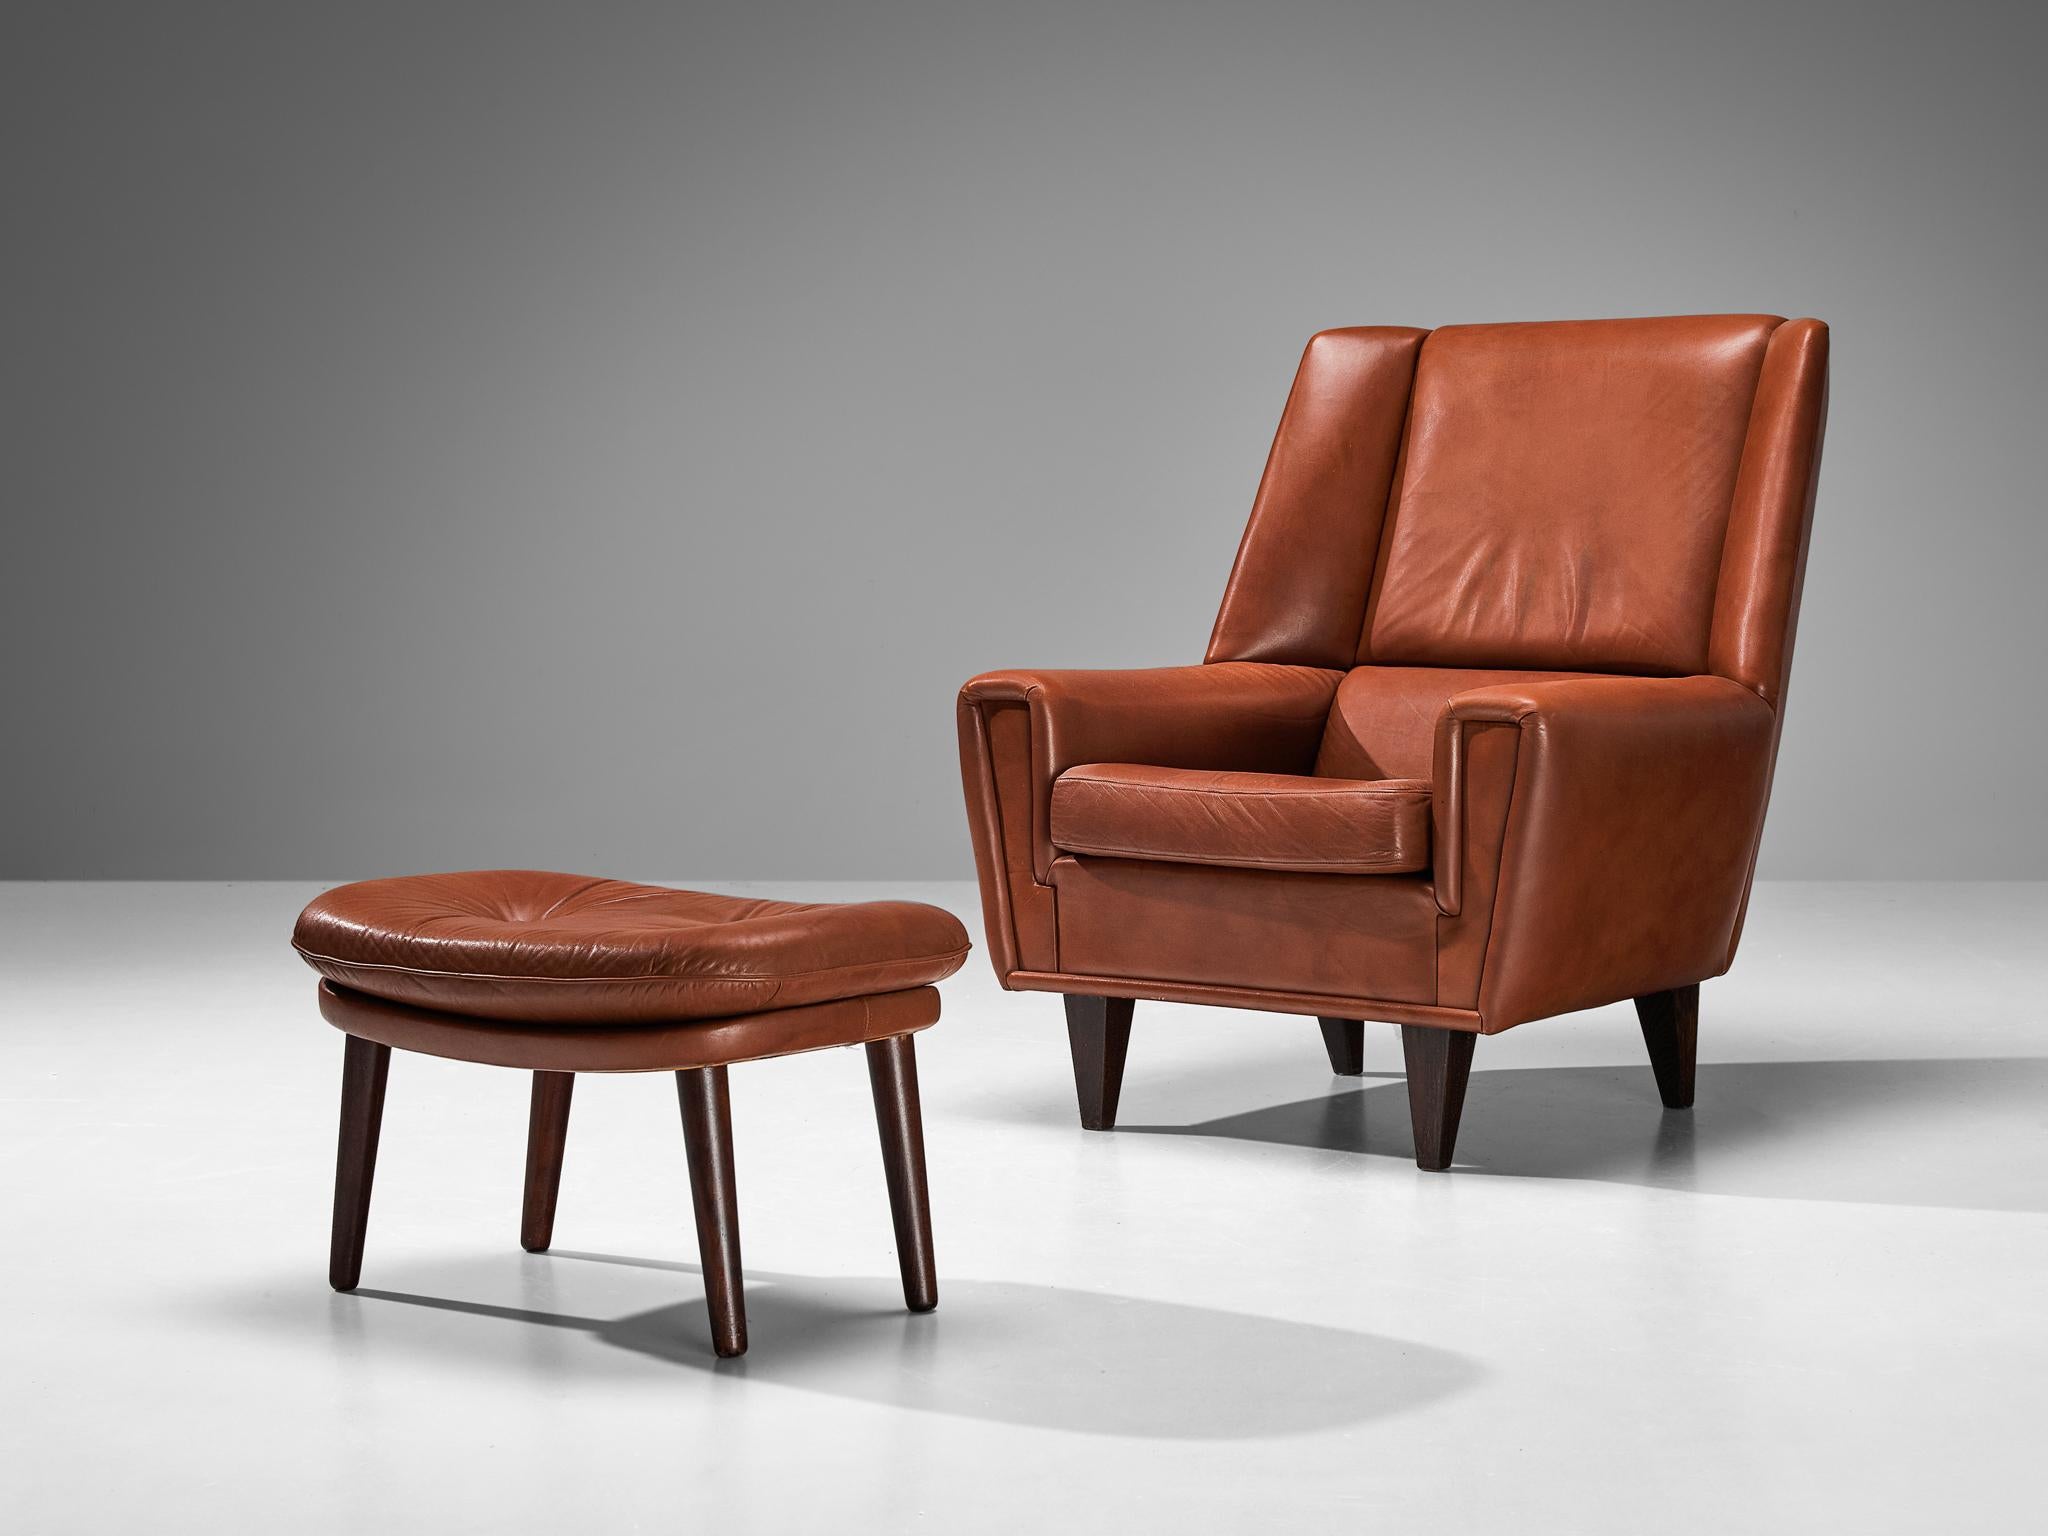 Danish cabinetmaker, lounge chair with ottoman, in brown leather and oak, Denmark, circa 1960.

This chair with ottoman is made to reach an ultimate level of comfort as can clearly be recognized in the design. This Danish chair features